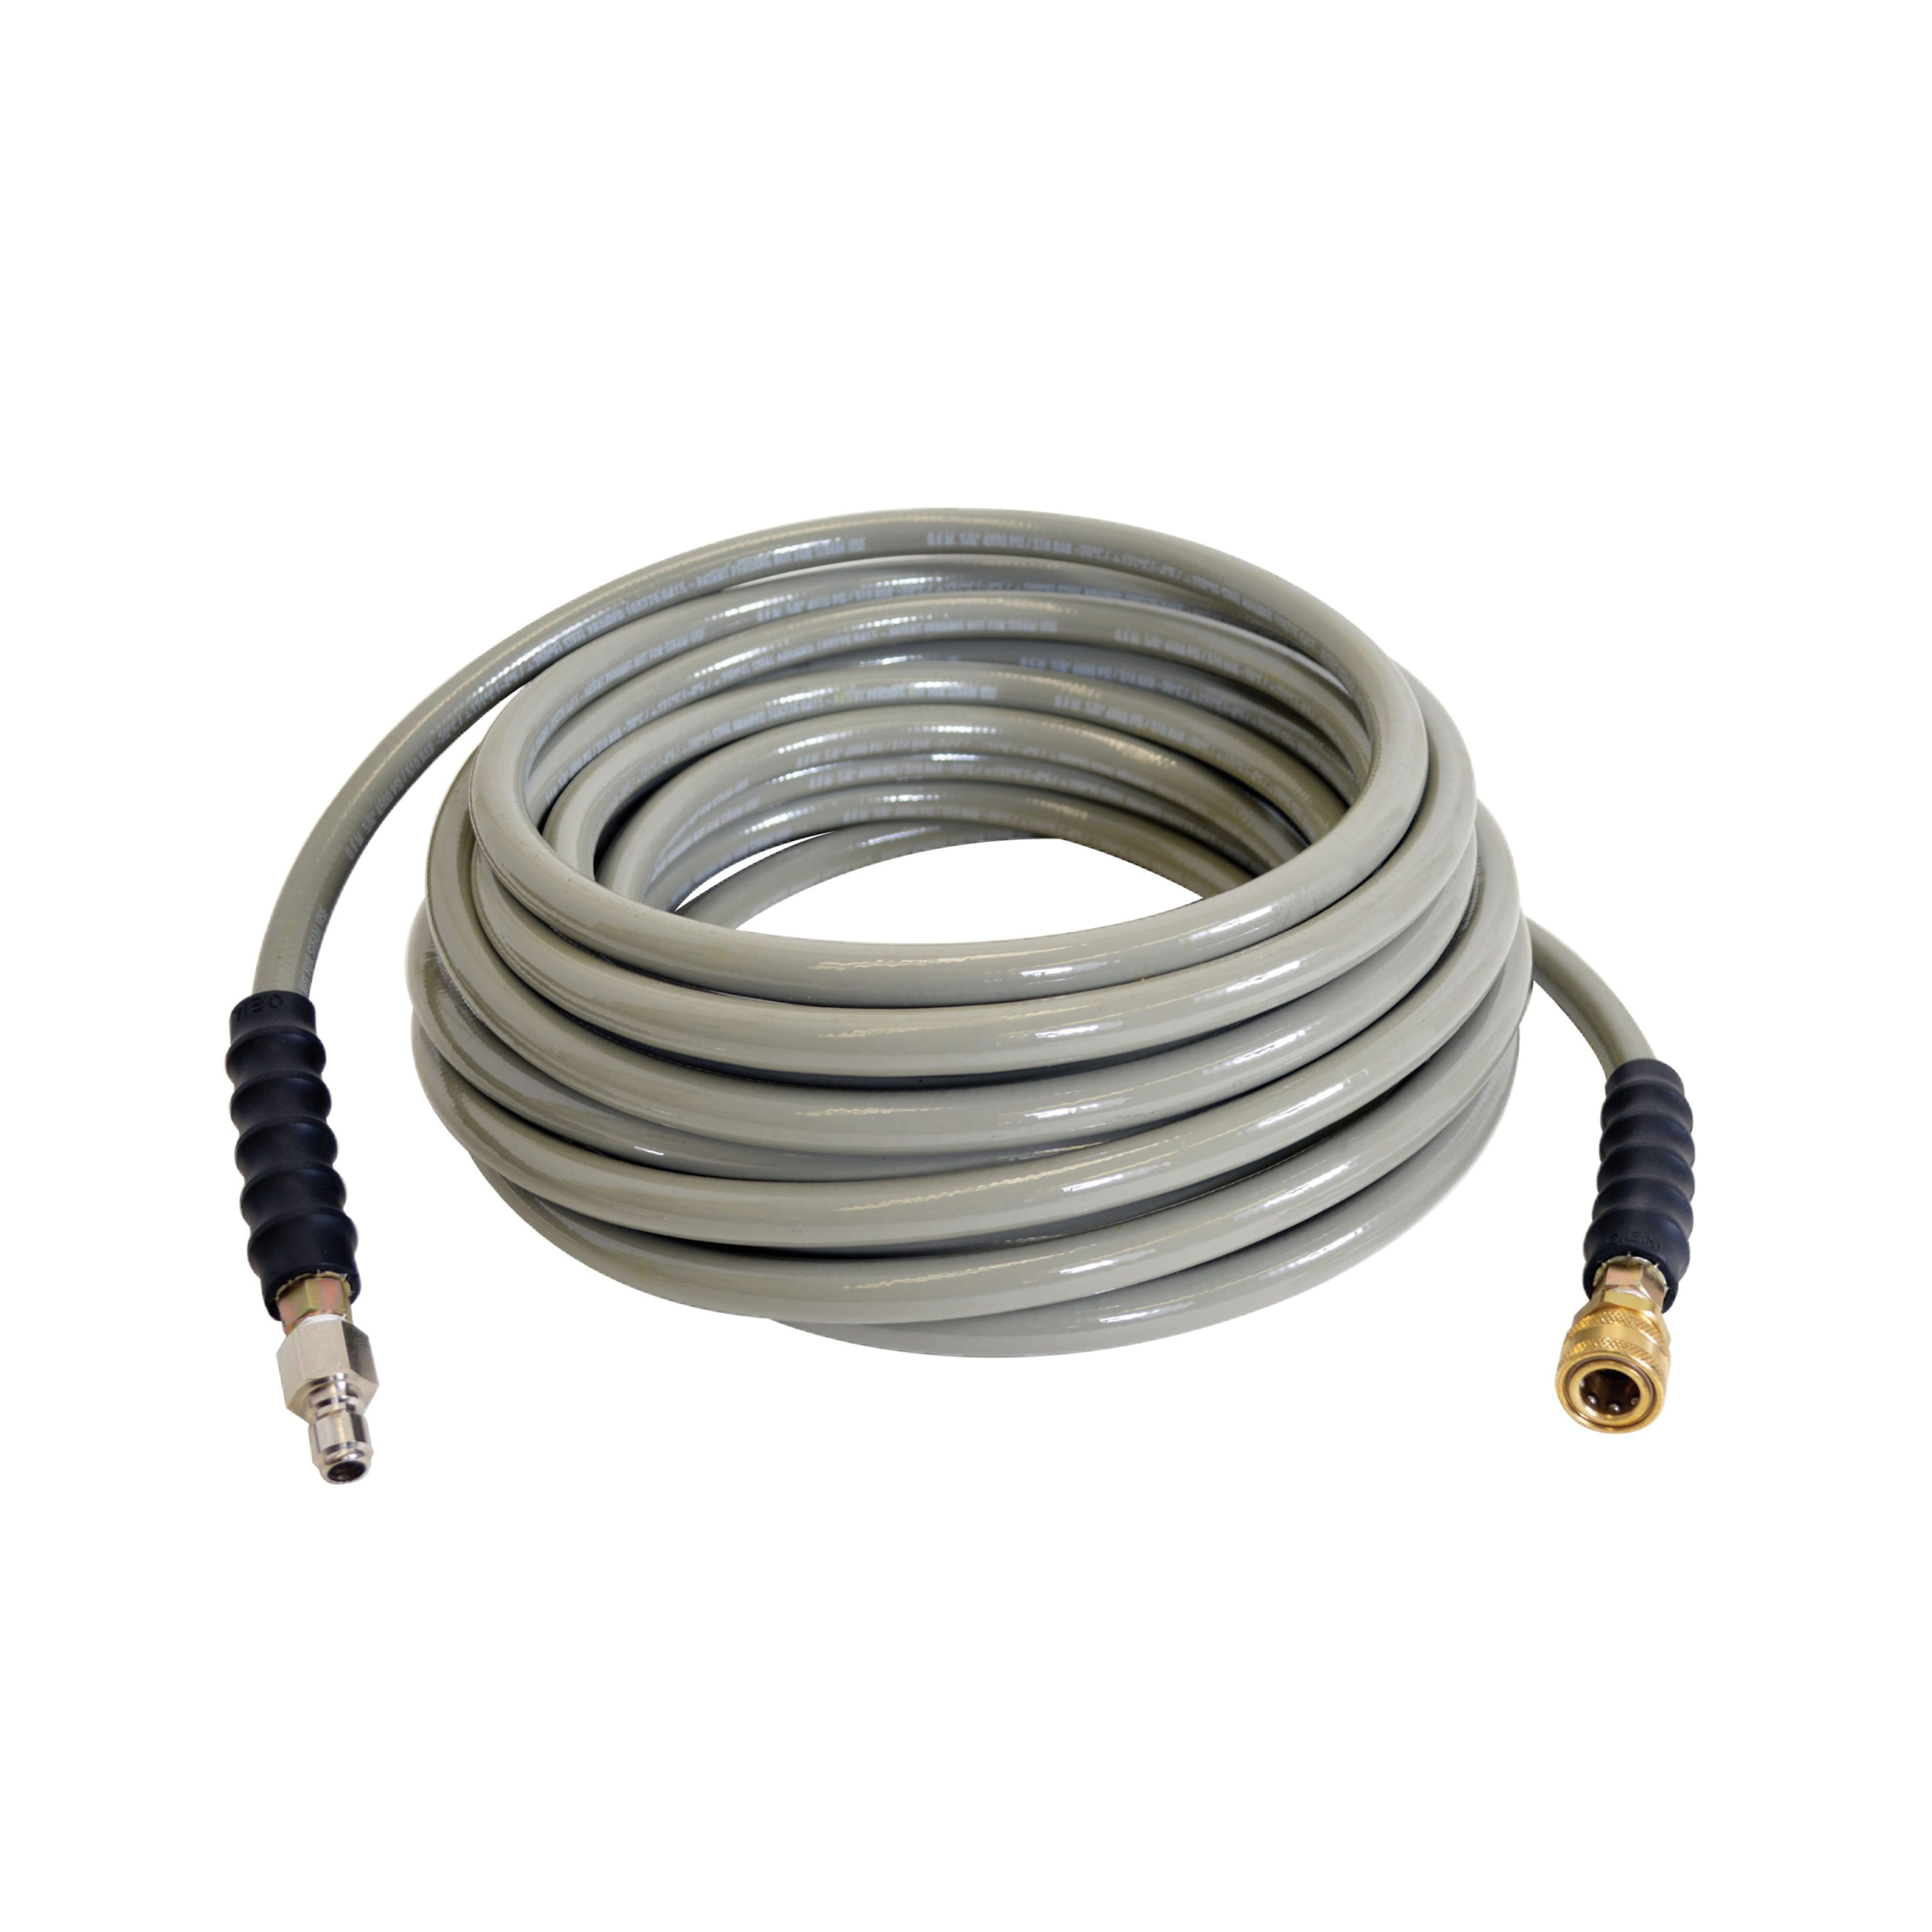 SIMPSON Monster Hose 3/8-in x 50-ft Pressure Washer Hose in the Pressure  Washer Hoses department at